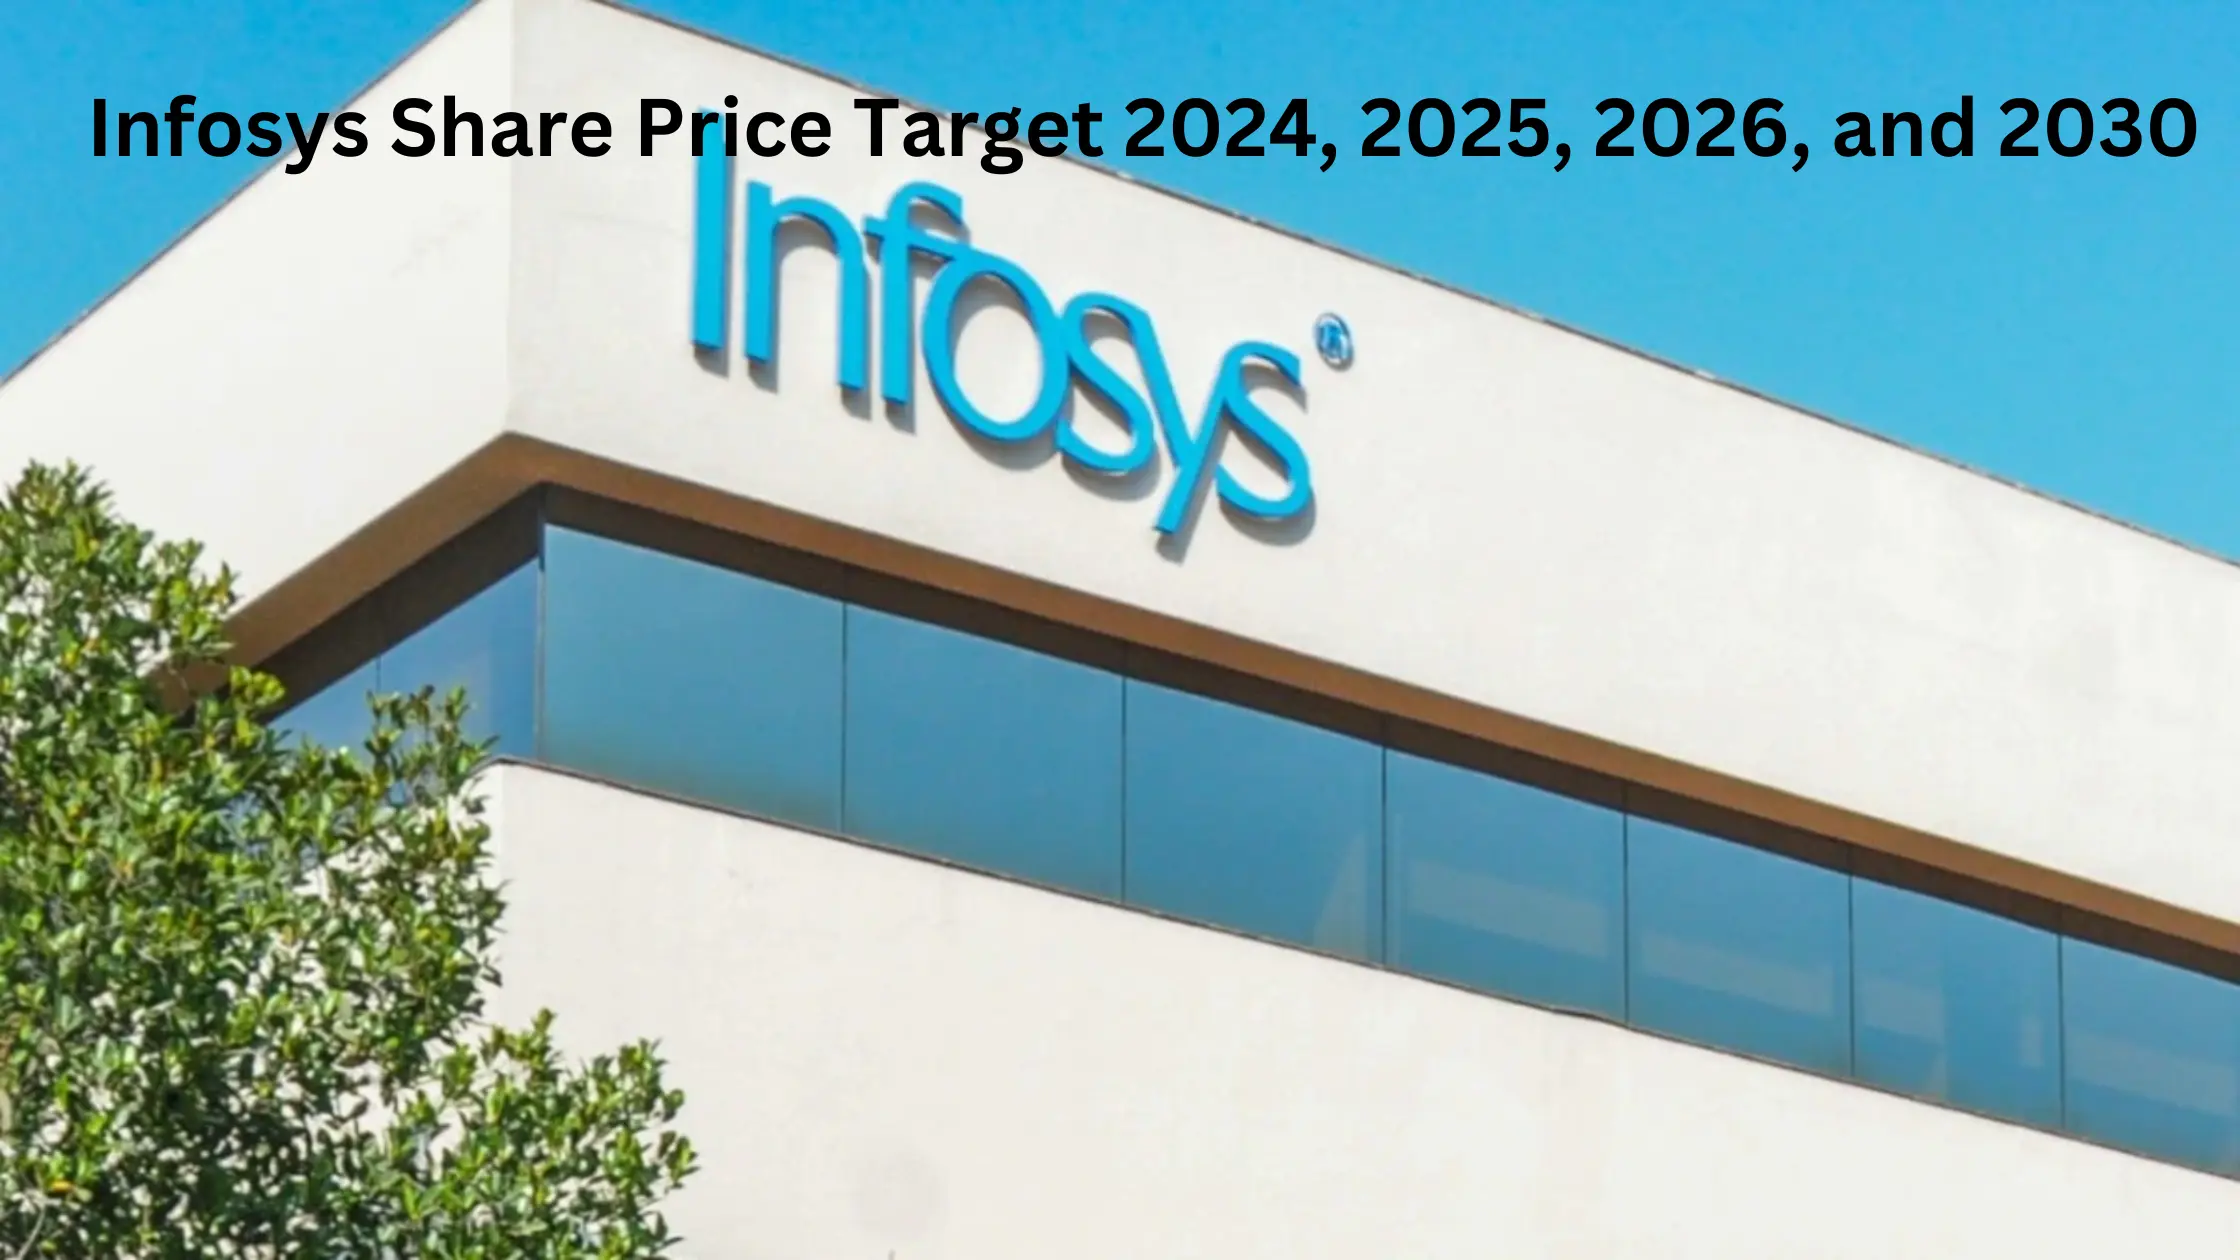 infosys share price target 2024, 2025, 2026 and 2030